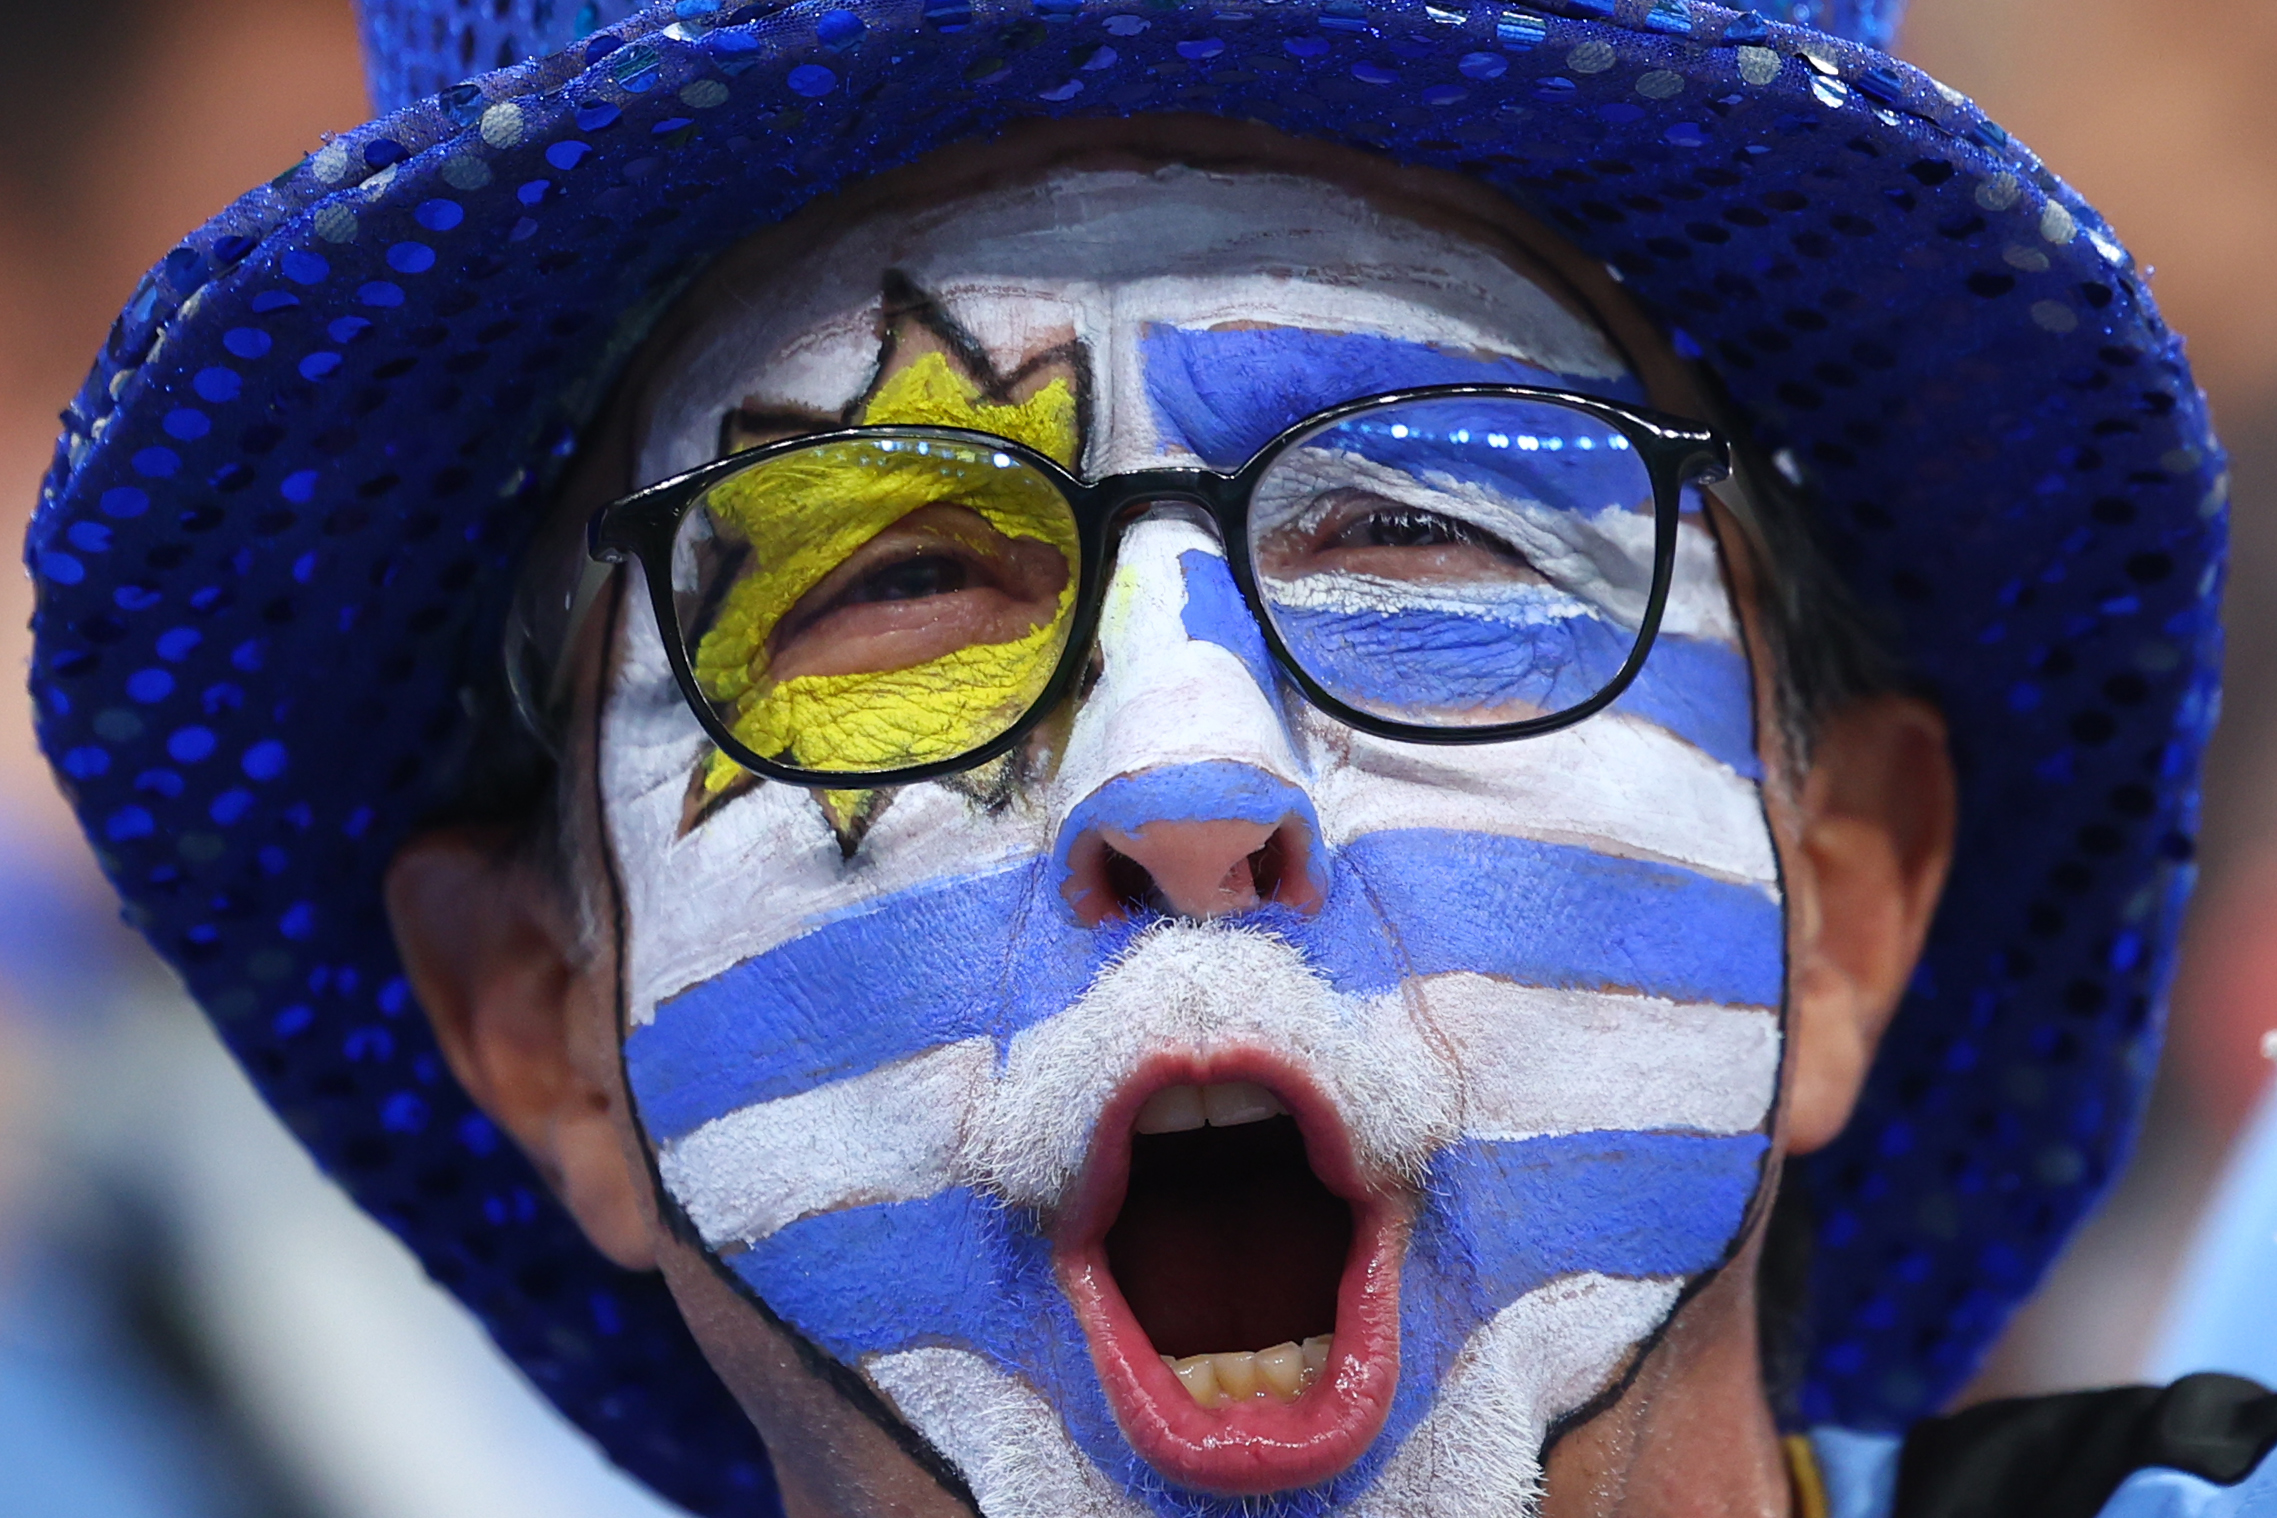 28 November 2022, Qatar, Lusail: An Uruguay fan cheers in the stands prior to the start of the FIFA World Cup Qatar 2022 Group H soccer match between Portugal and Uruguay at Lusail Stadium. Photo: Tom Weller/dpa